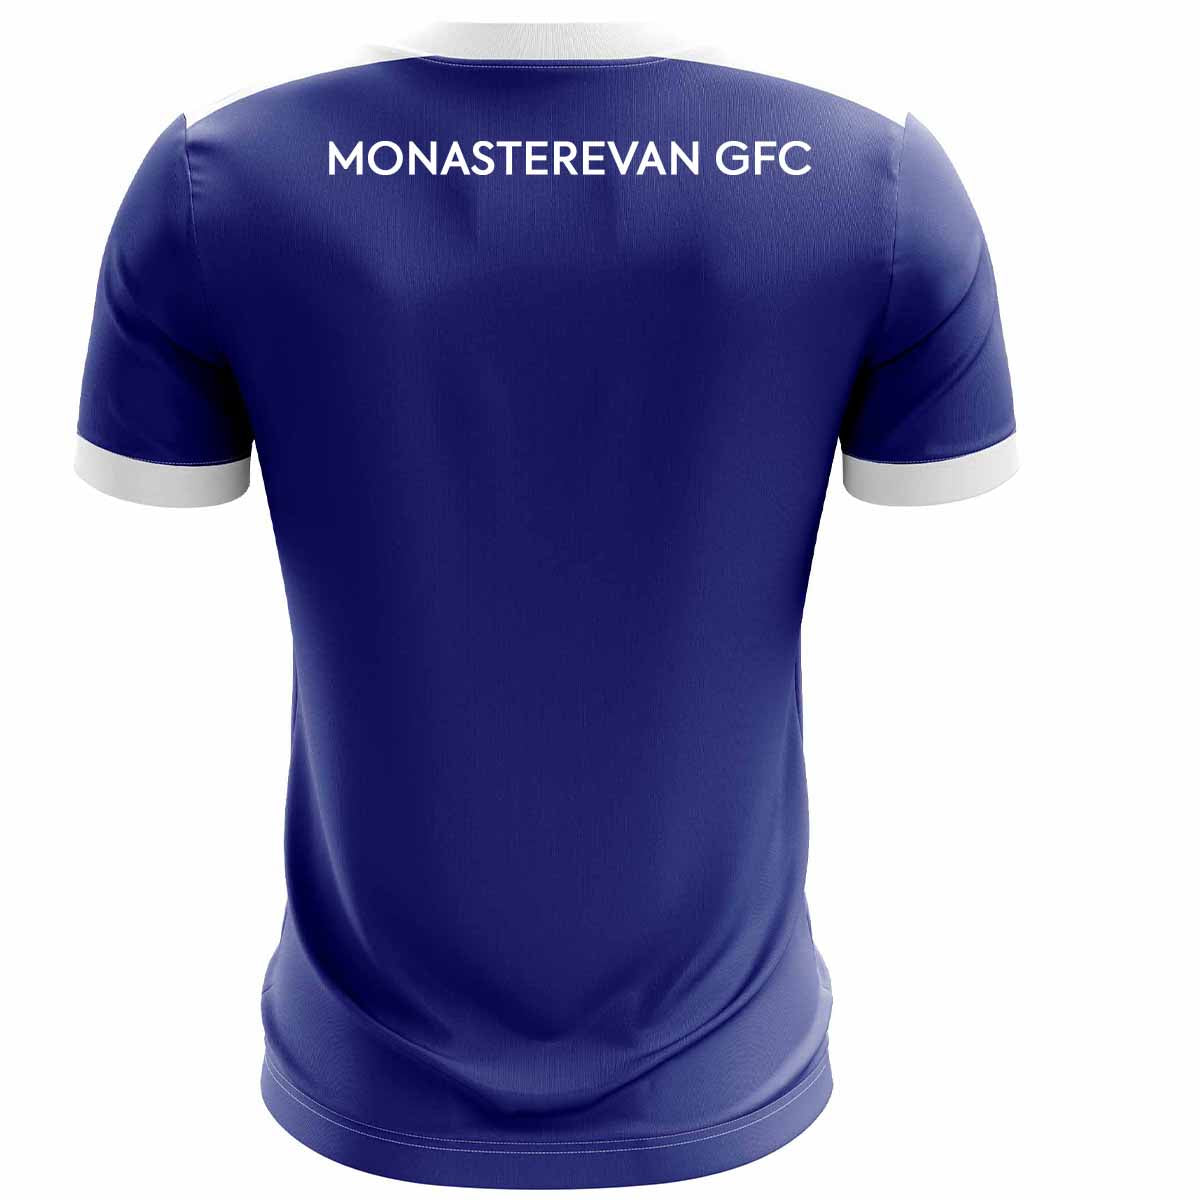 Mc Keever Monasterevan GFC Playing Jersey 3 - Youth - Royal